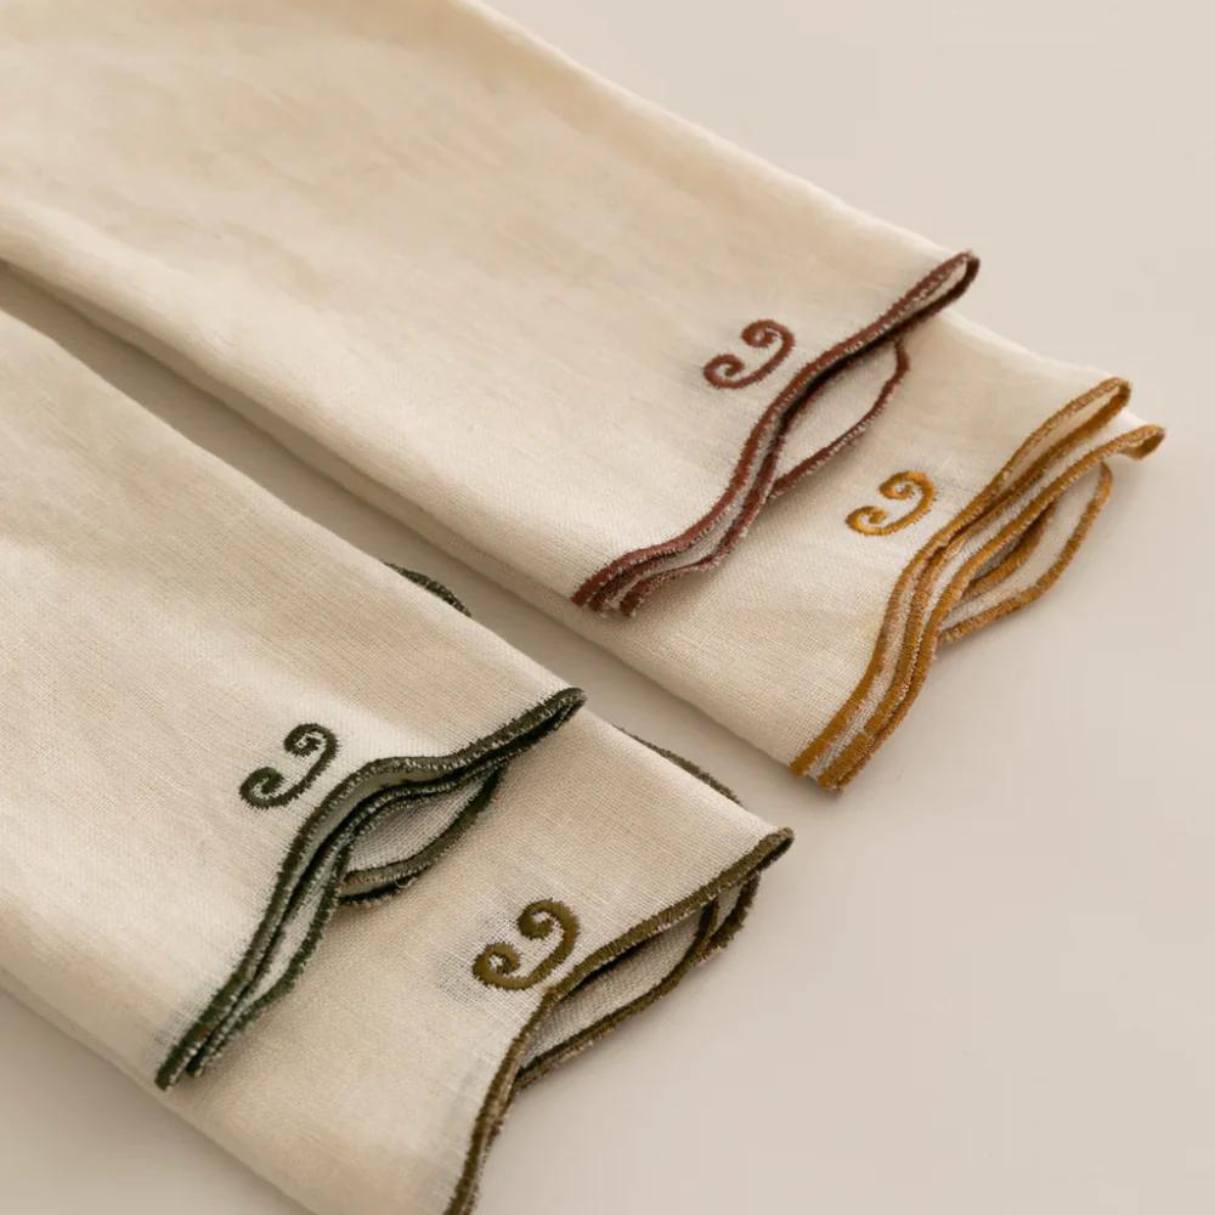 How To Store Napkins